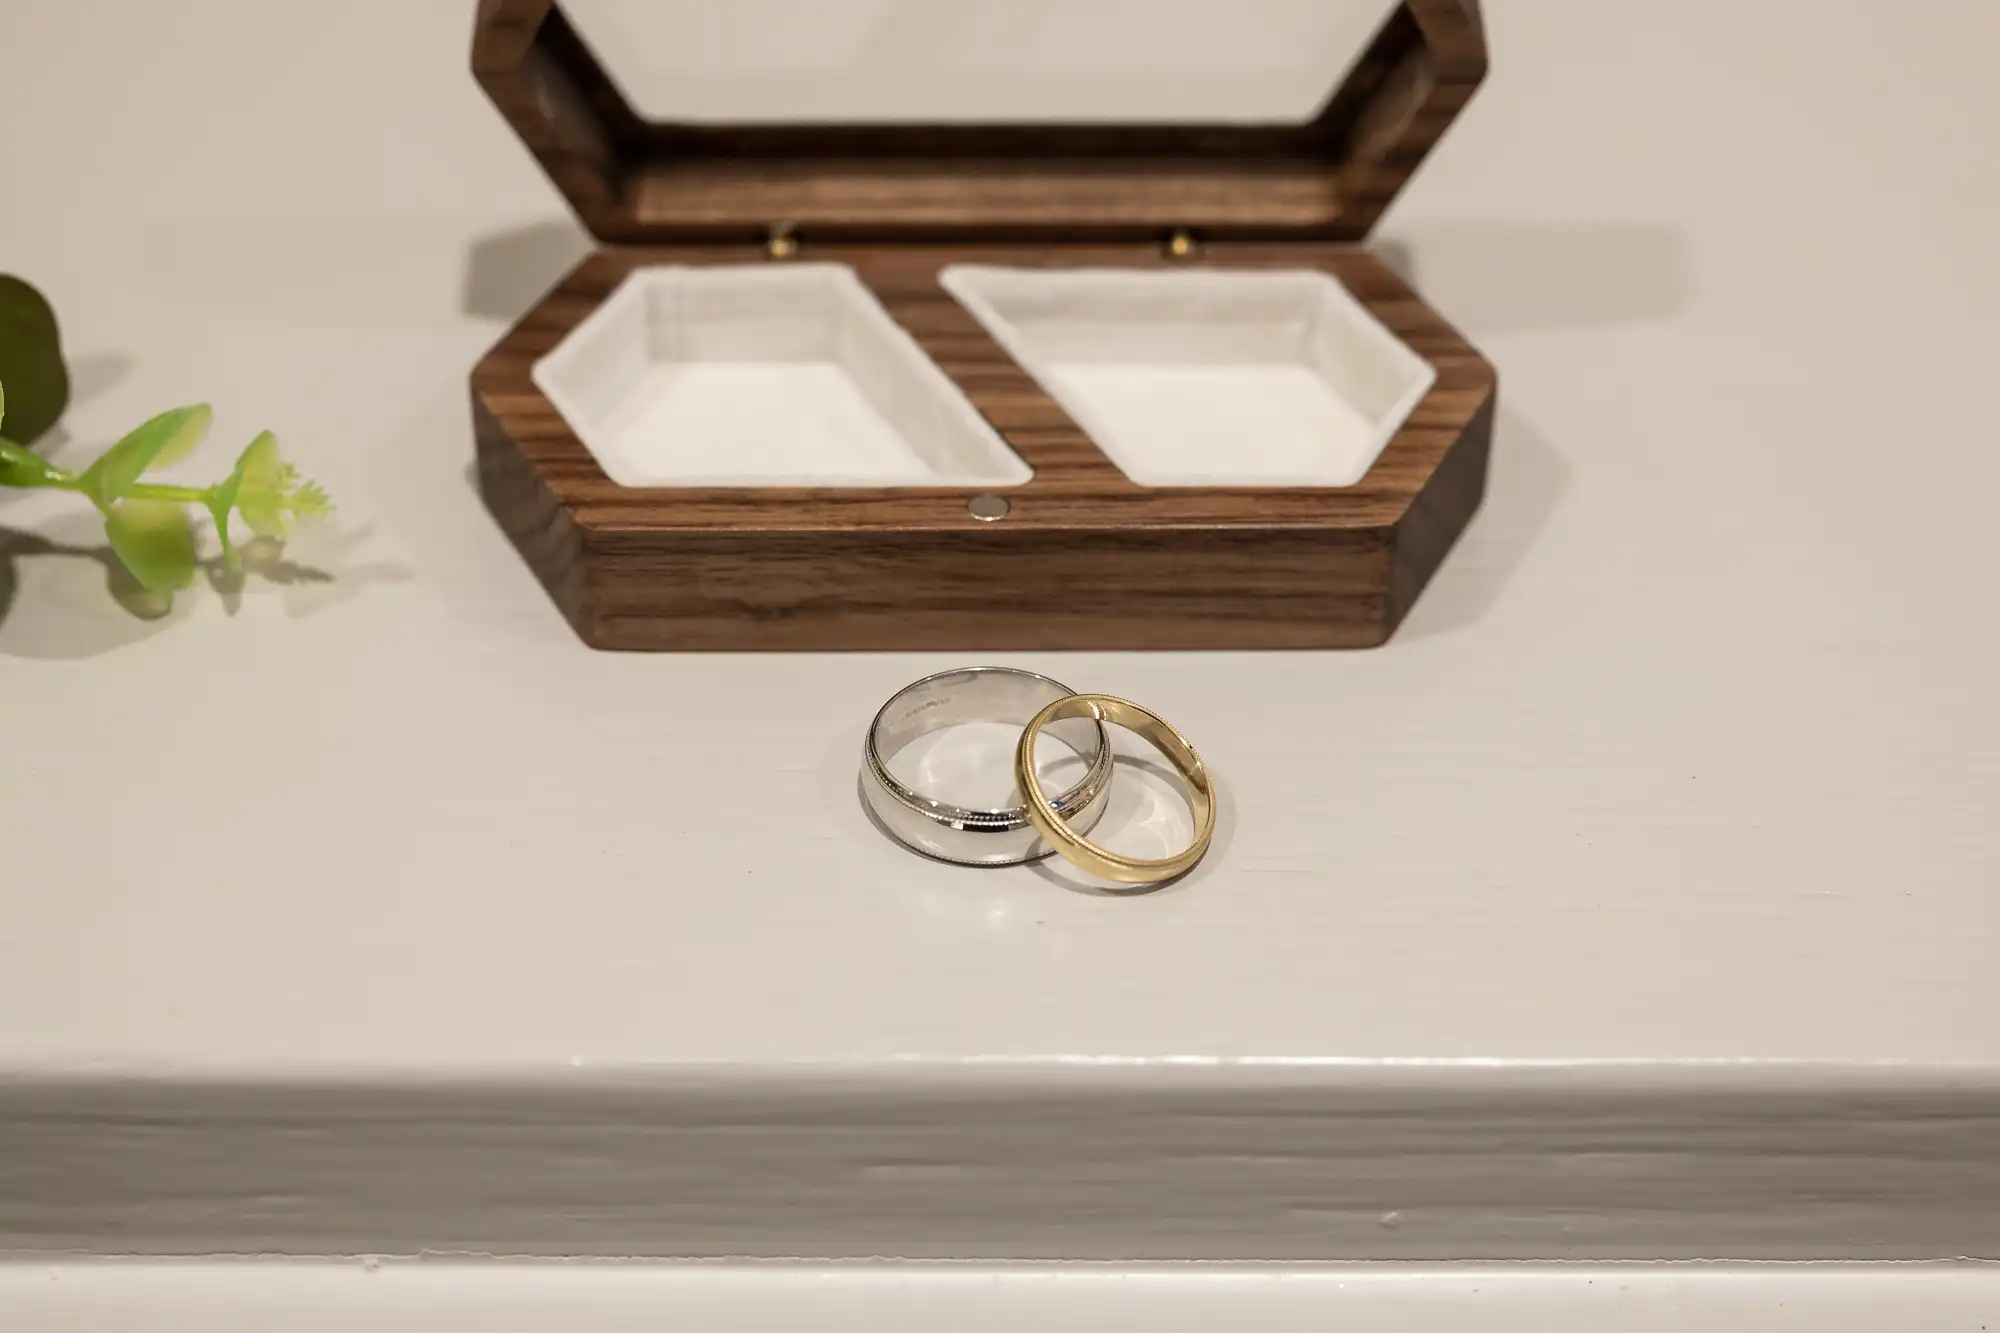 Two rings, one silver and one gold, lie in front of an open wooden ring box with a white interior. A small green plant is partially visible on the left side.